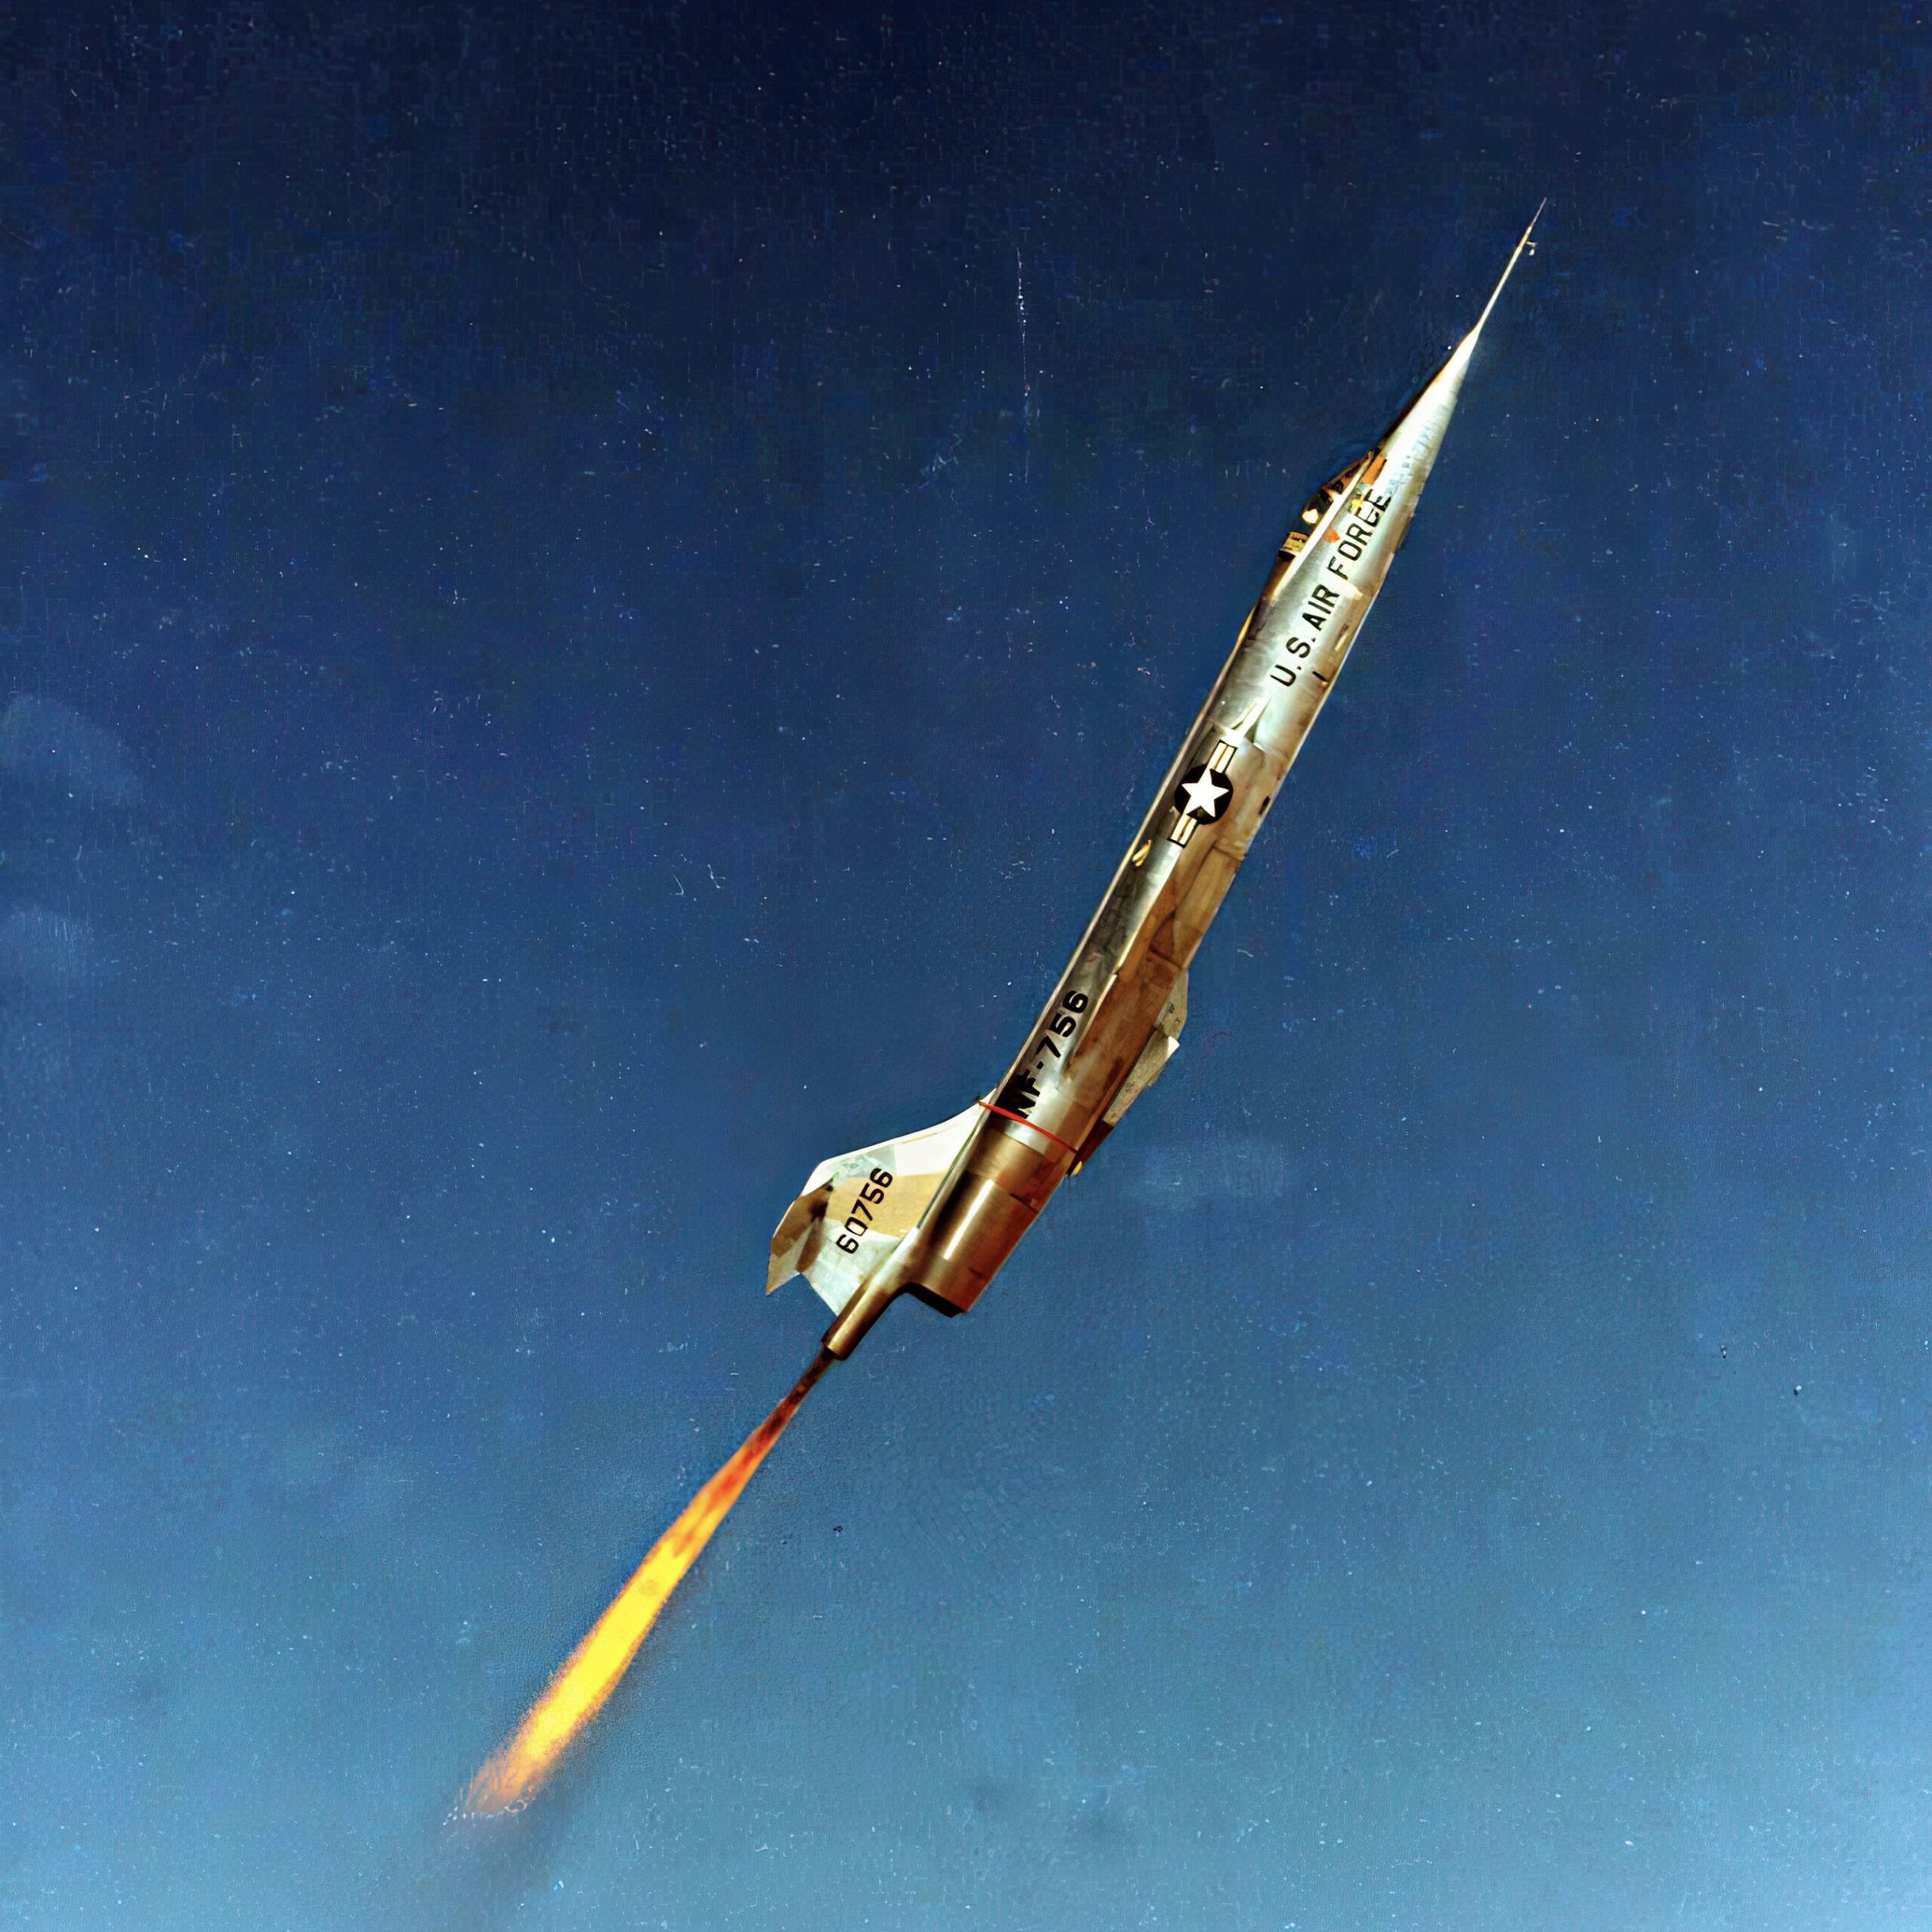 NF-104, modification of F-104 Starfighter with rocket engine